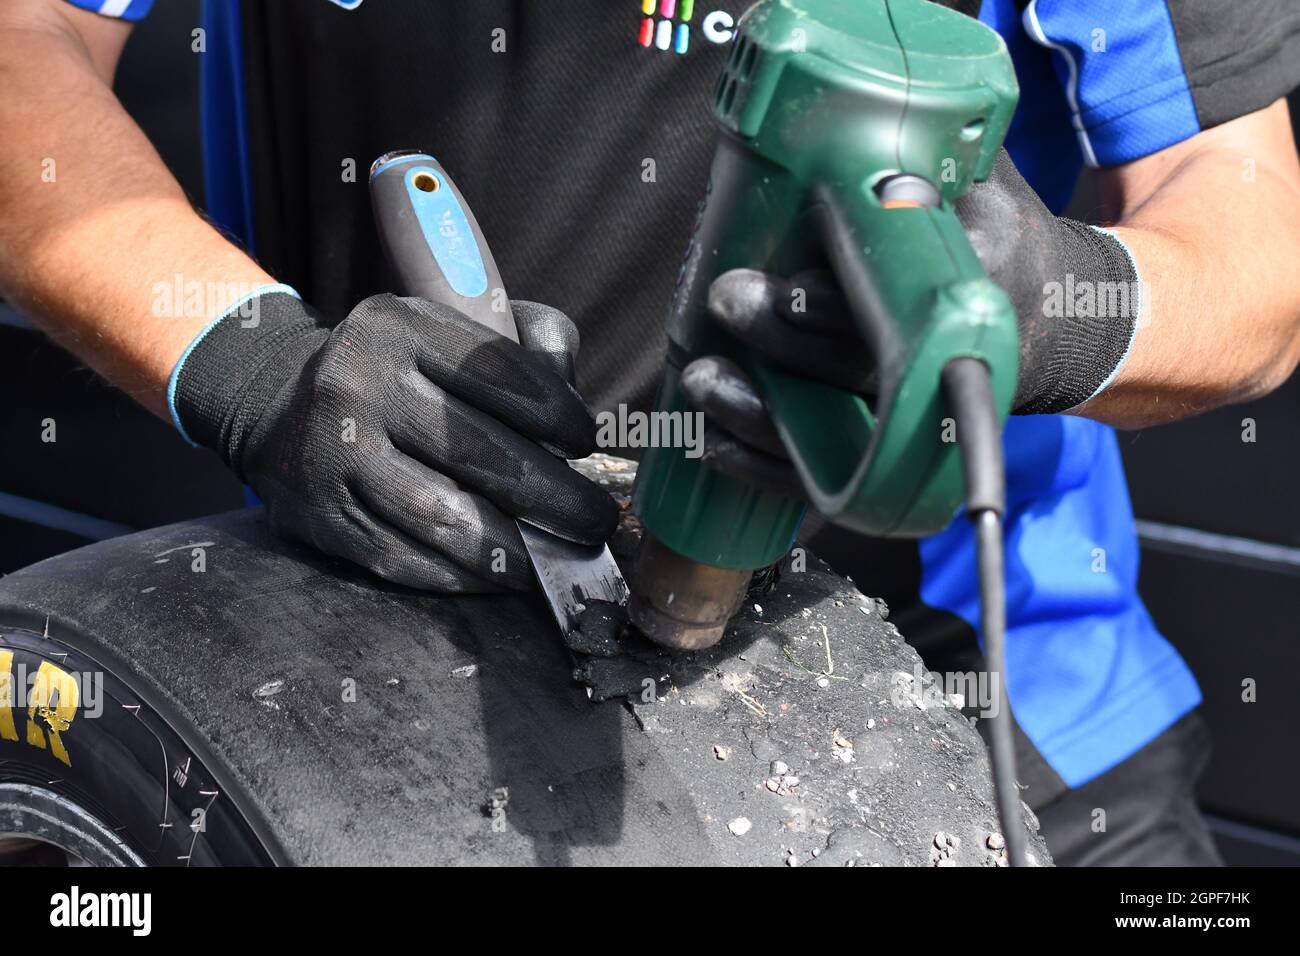 A team mechanic removing the worn rubber with a heat gun from a recently run slick racing car tyre Stock Photo